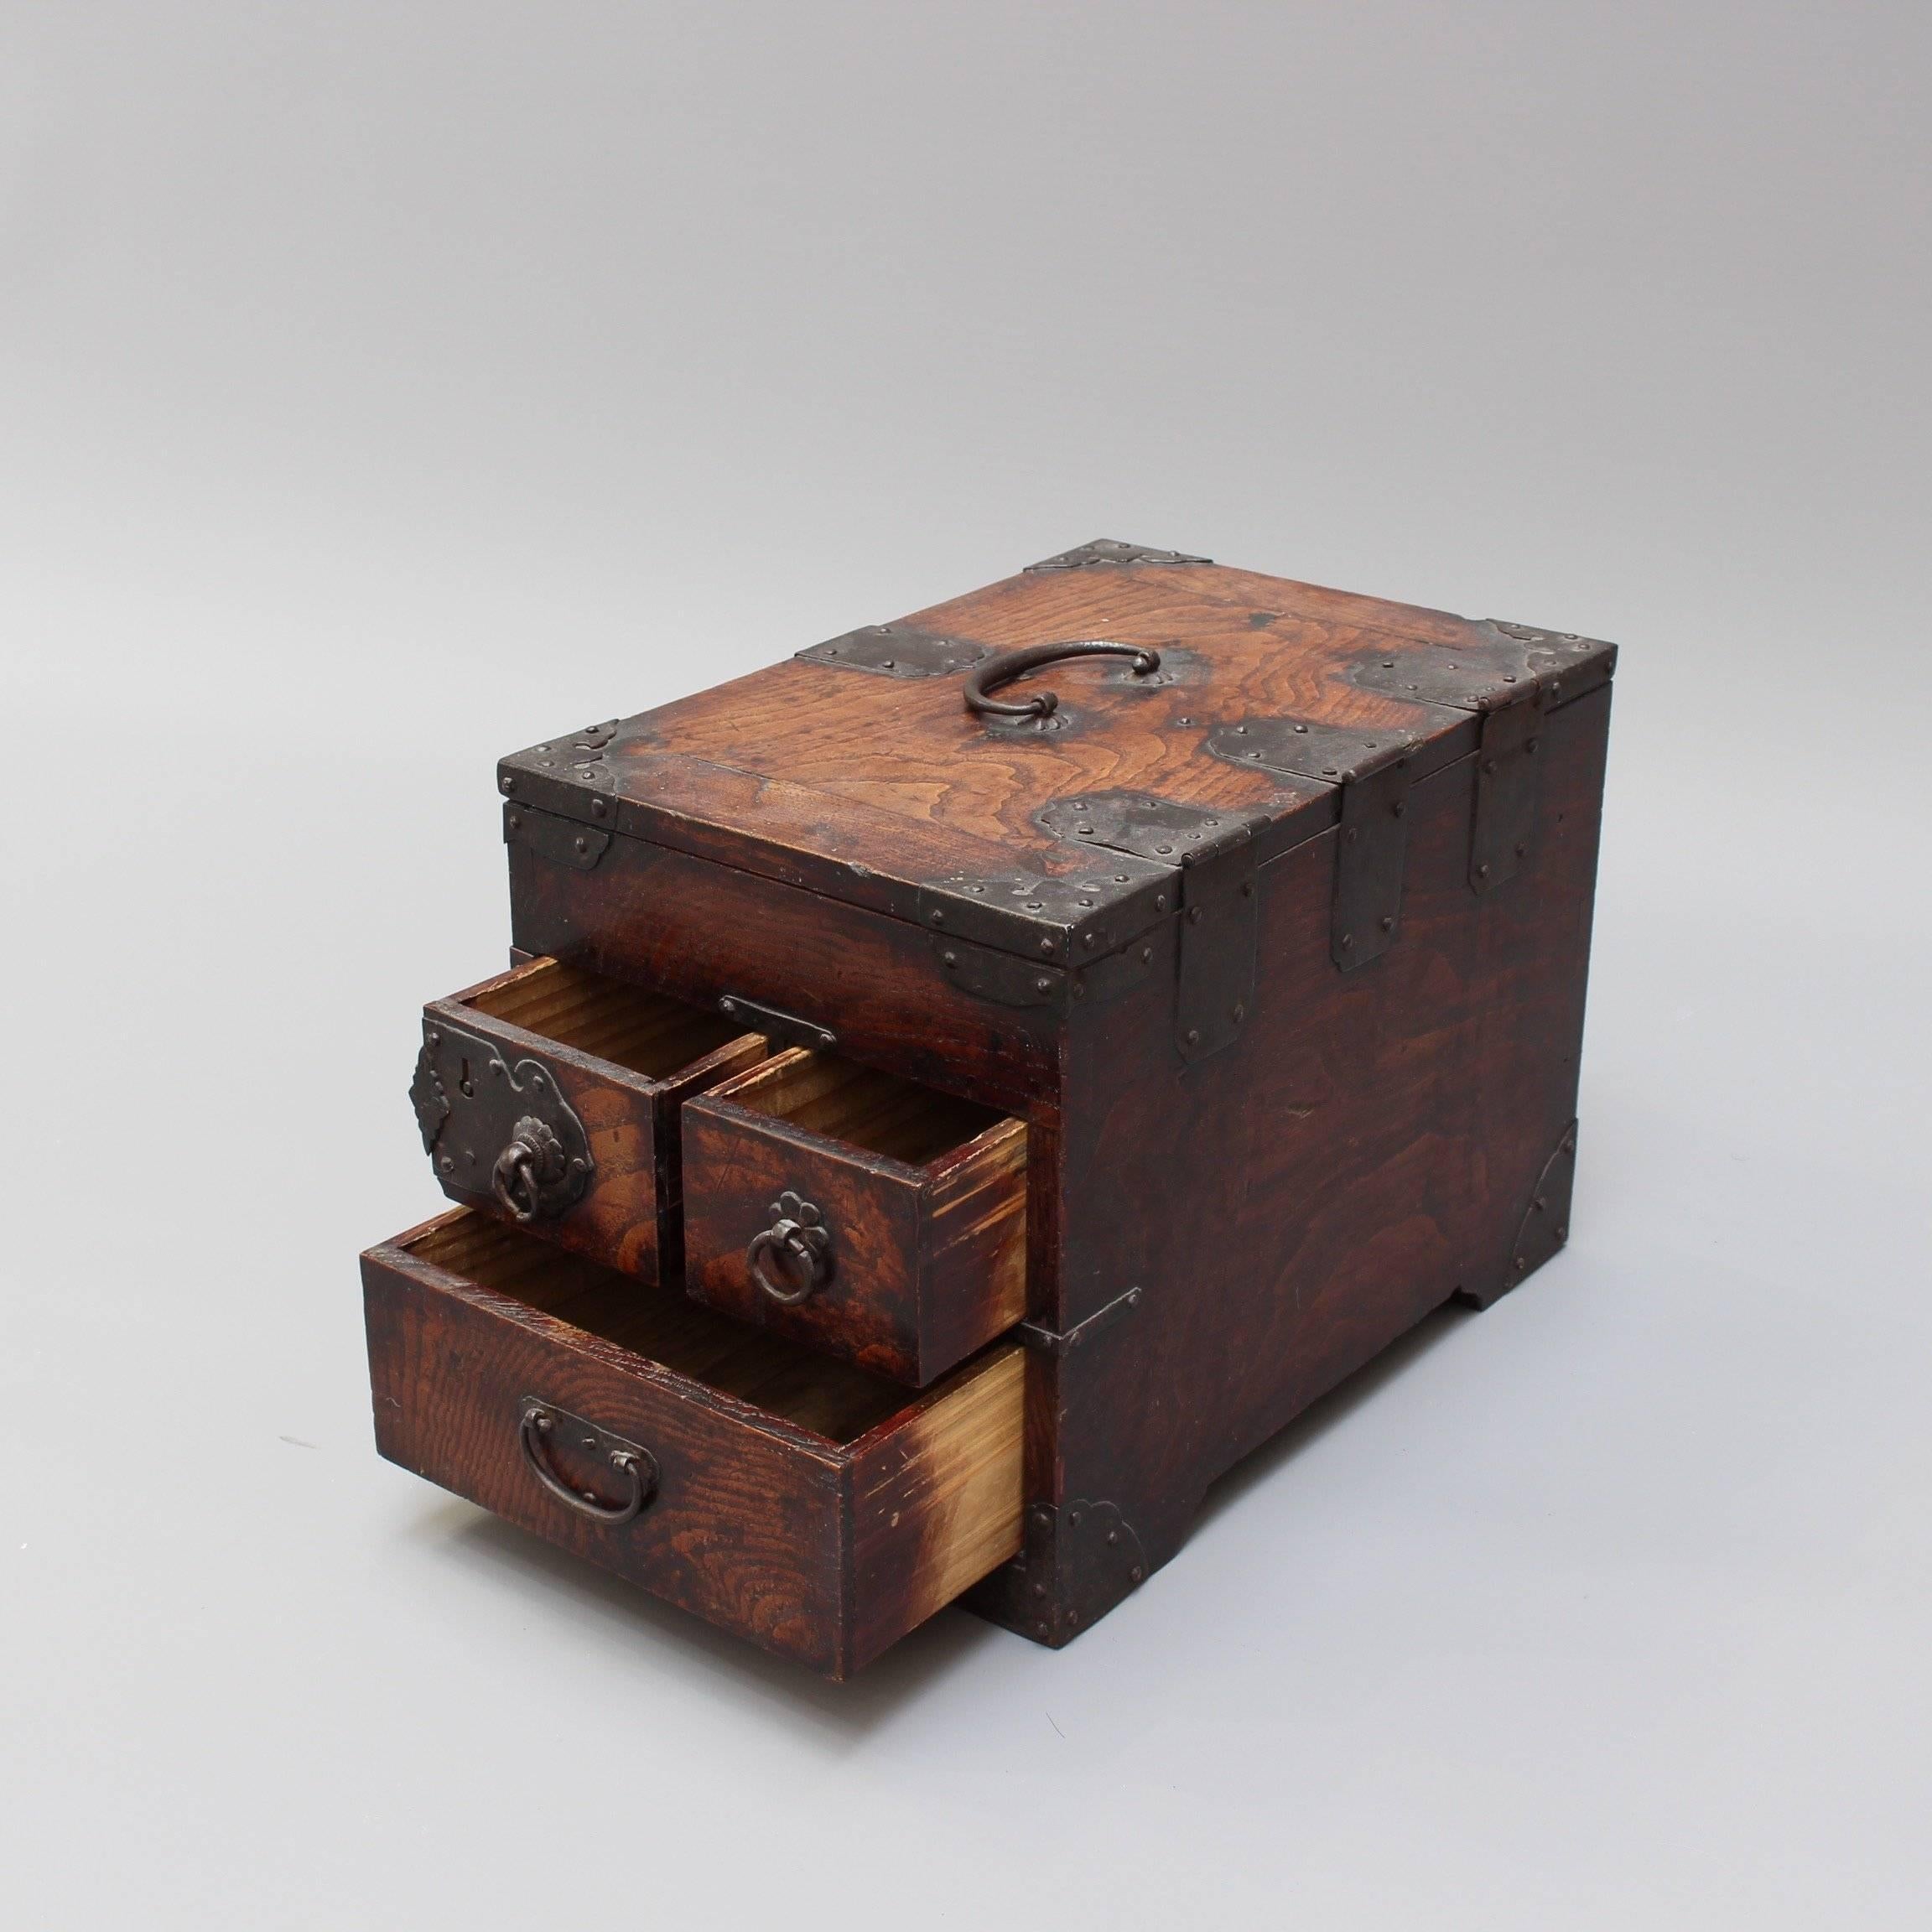 Antique Japanese wooden writing box with decorative hardware (Meiji Era). This calligraphy box has sumptuous wood with characterful painted black hardware. The lid is hinged and has a carrying handle. The box also has three side drawers - one with